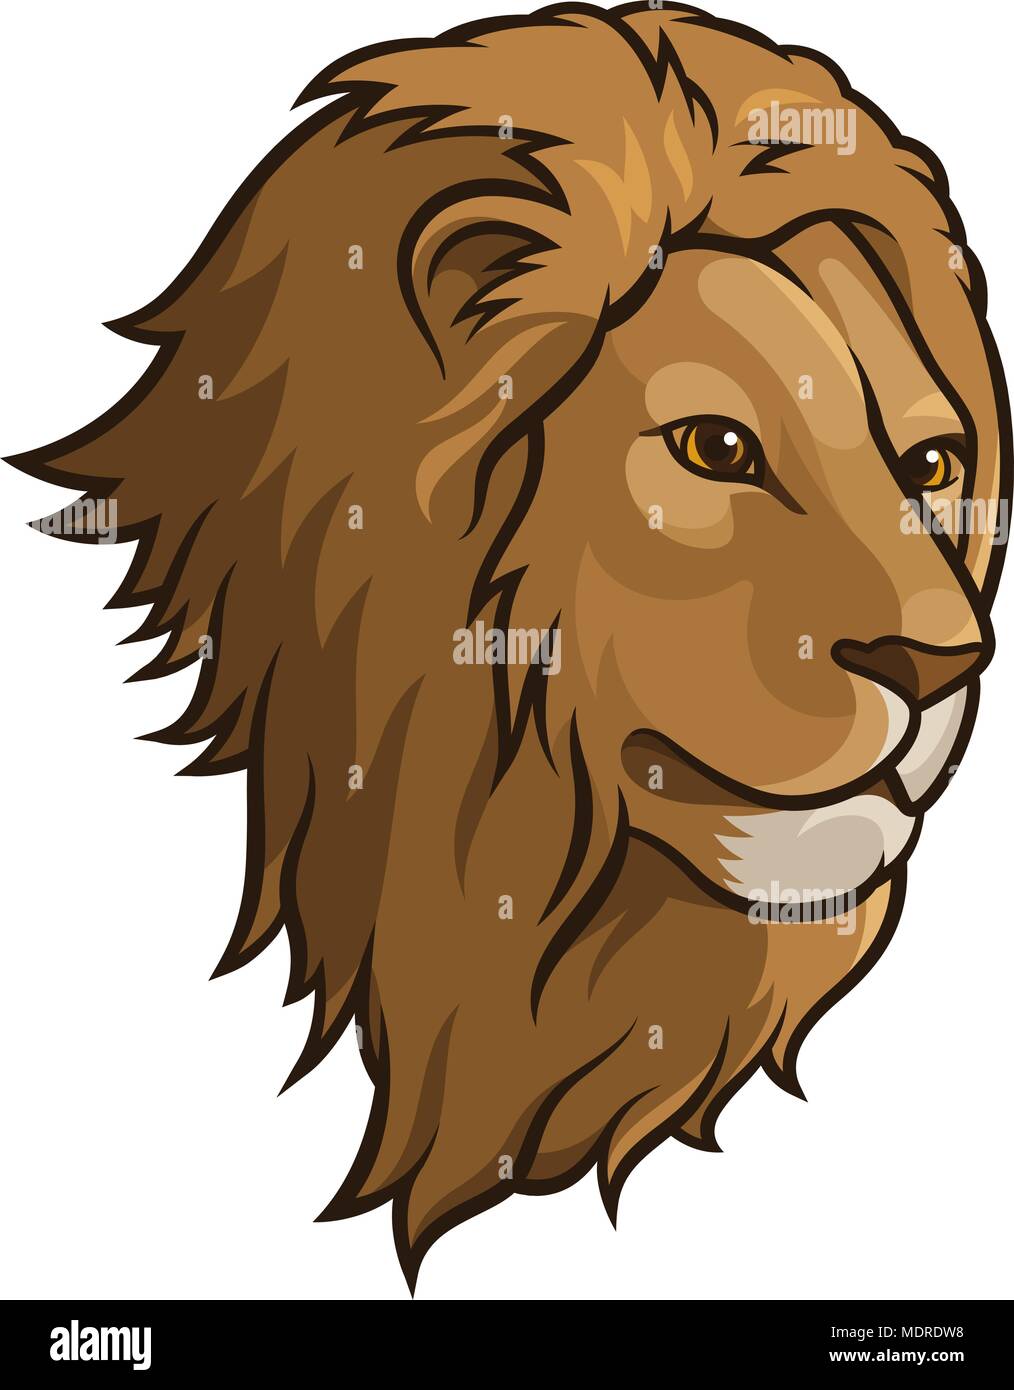 Lion head isolated on white. This vector illustration can be used as a print on T-shirts, tattoo element or other uses Stock Vector